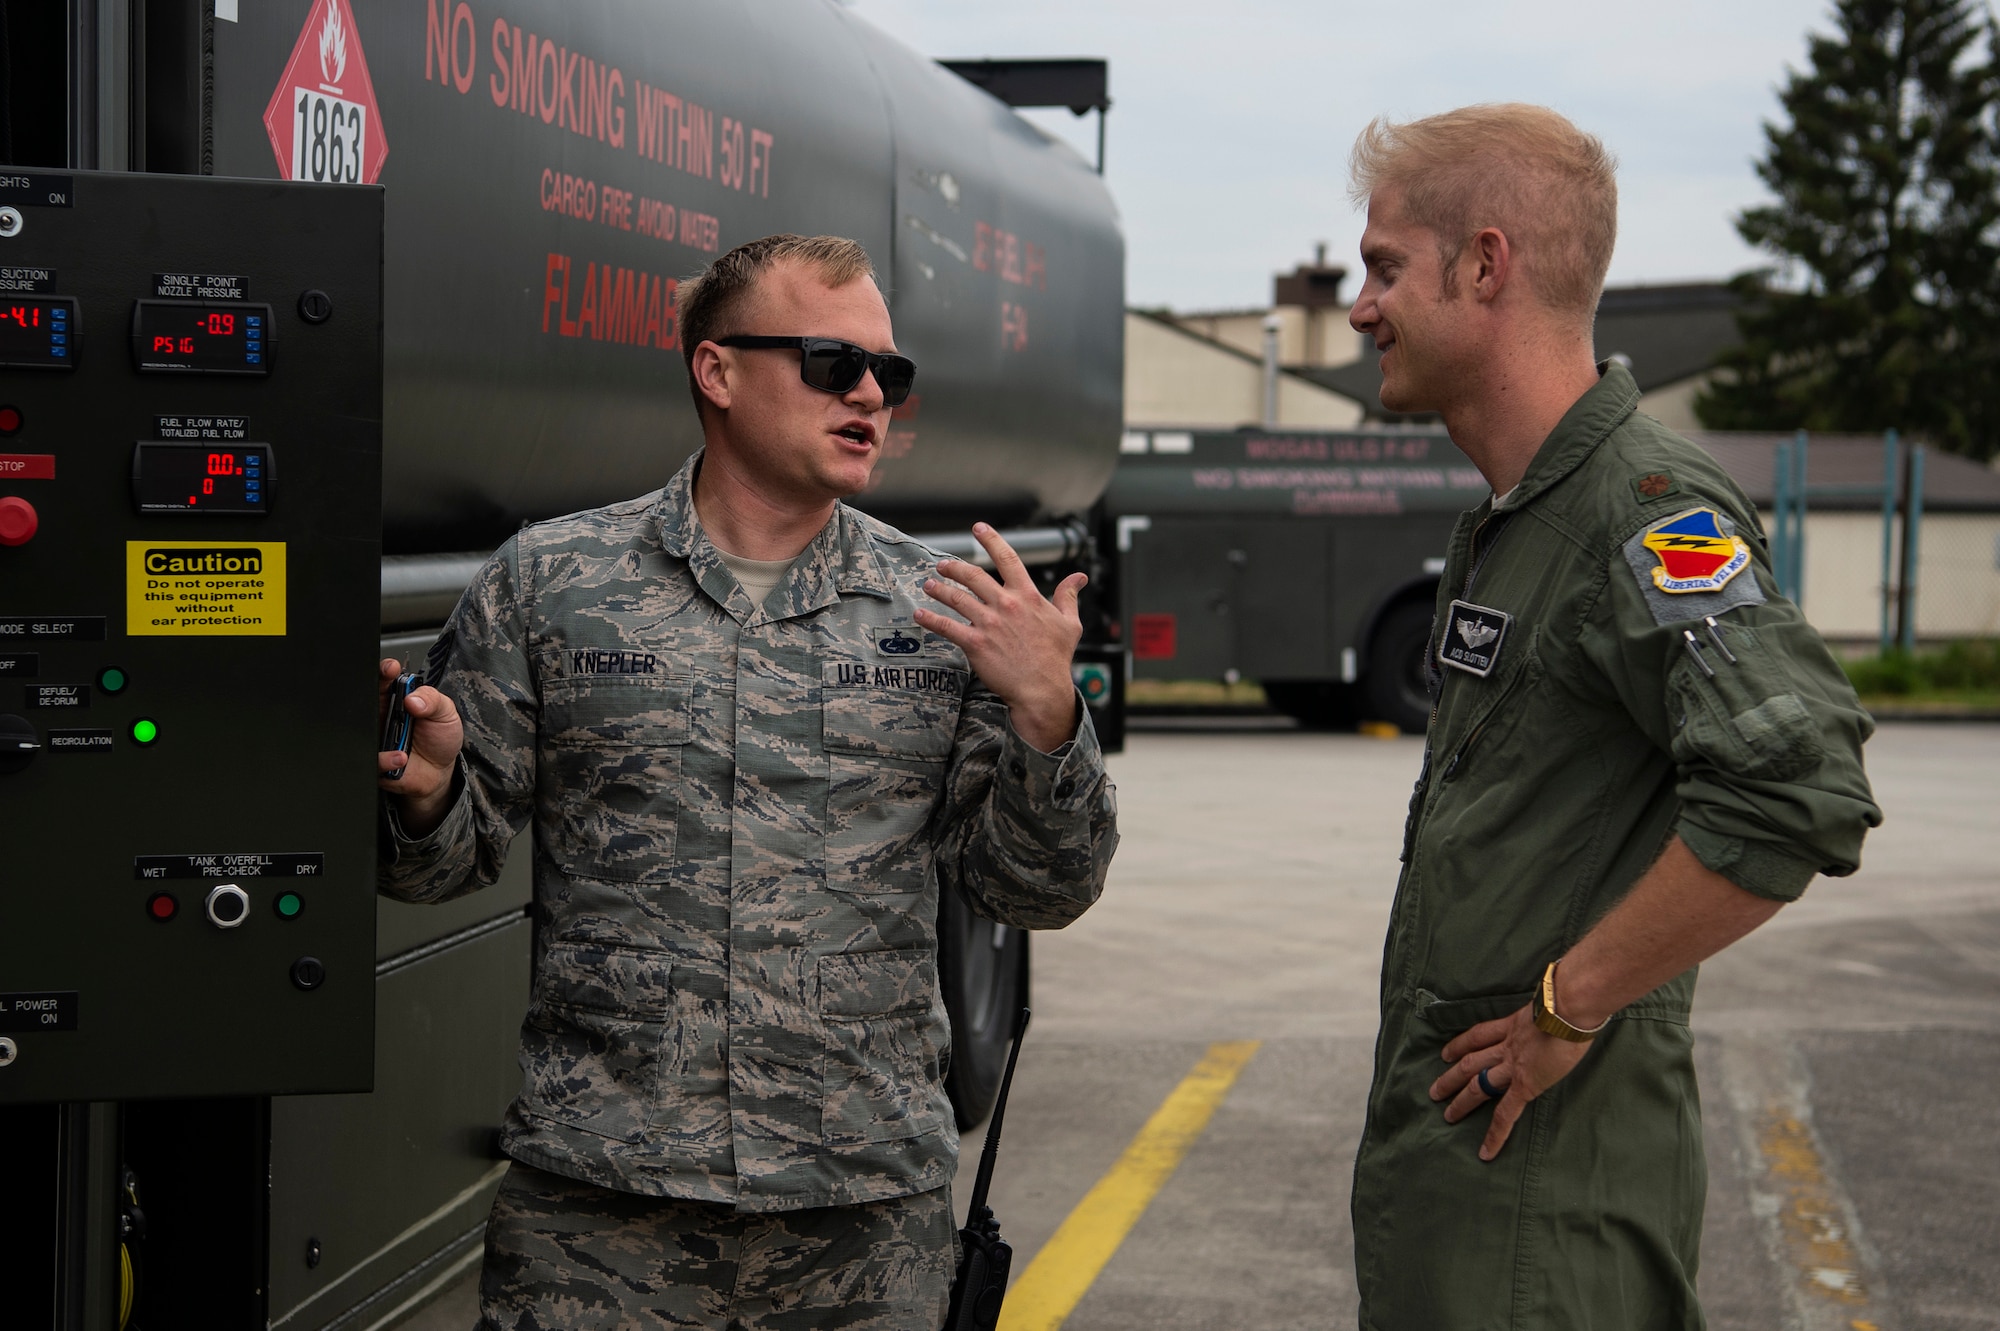 U.S. Air Force Maj. Michael Slotten, 421st Fighter Squadron F-35A Lightning II pilot, right, speaks with Staff Sgt. Jonathan Knepler, 52nd Logistics Readiness Squadron preventive maintenance team NCO in charge, left, at Spangdahlem Air Base, Germany, July 11, 2019. Slotten was stationed at Spangdahlem from 2004 to 2006 as an Airman first class fuels distributor operator. He stopped by his old unit and learned about new changes made since he last operated fuel trucks. (U.S. Air Force photo by Airman 1st Class Valerie Seelye)